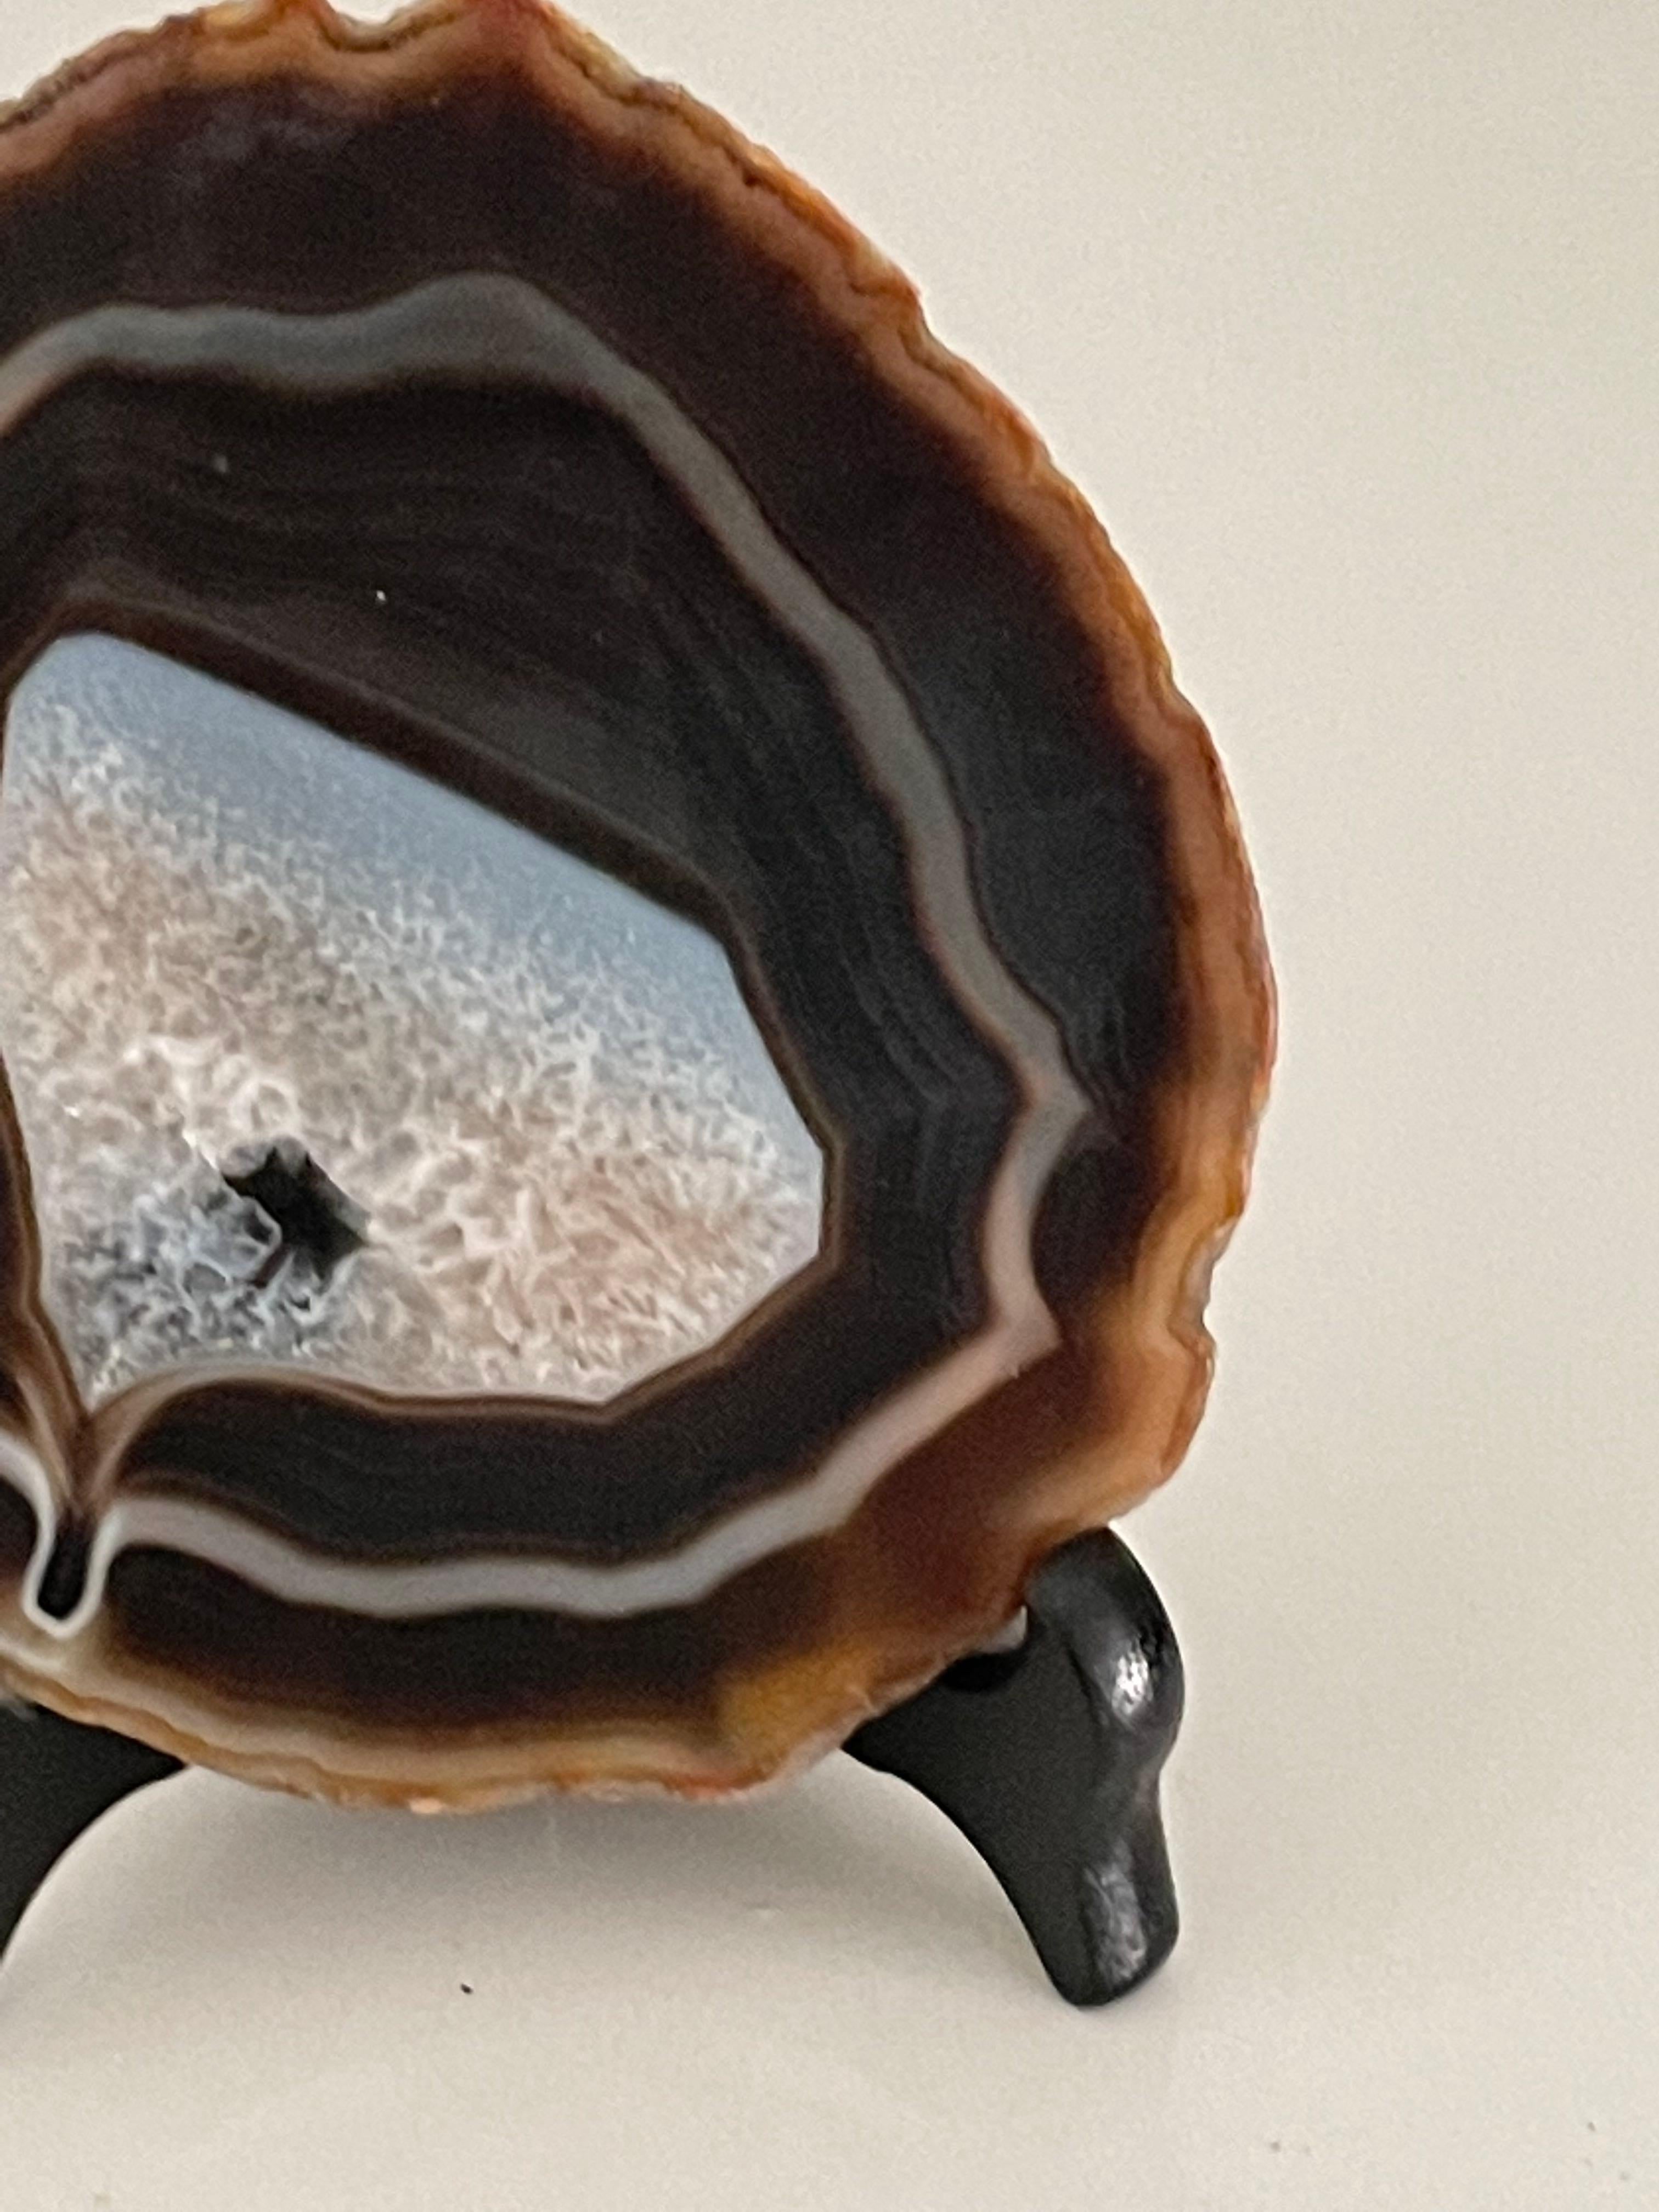 Brazilian thin slice of agate mounted on a wooden stand.
Agate is a banded form of finely-grained, microcrystalline Quartz. 
The lovely brown color patterns and cream banding make this translucent gemstone very unique. 
Agates can have many